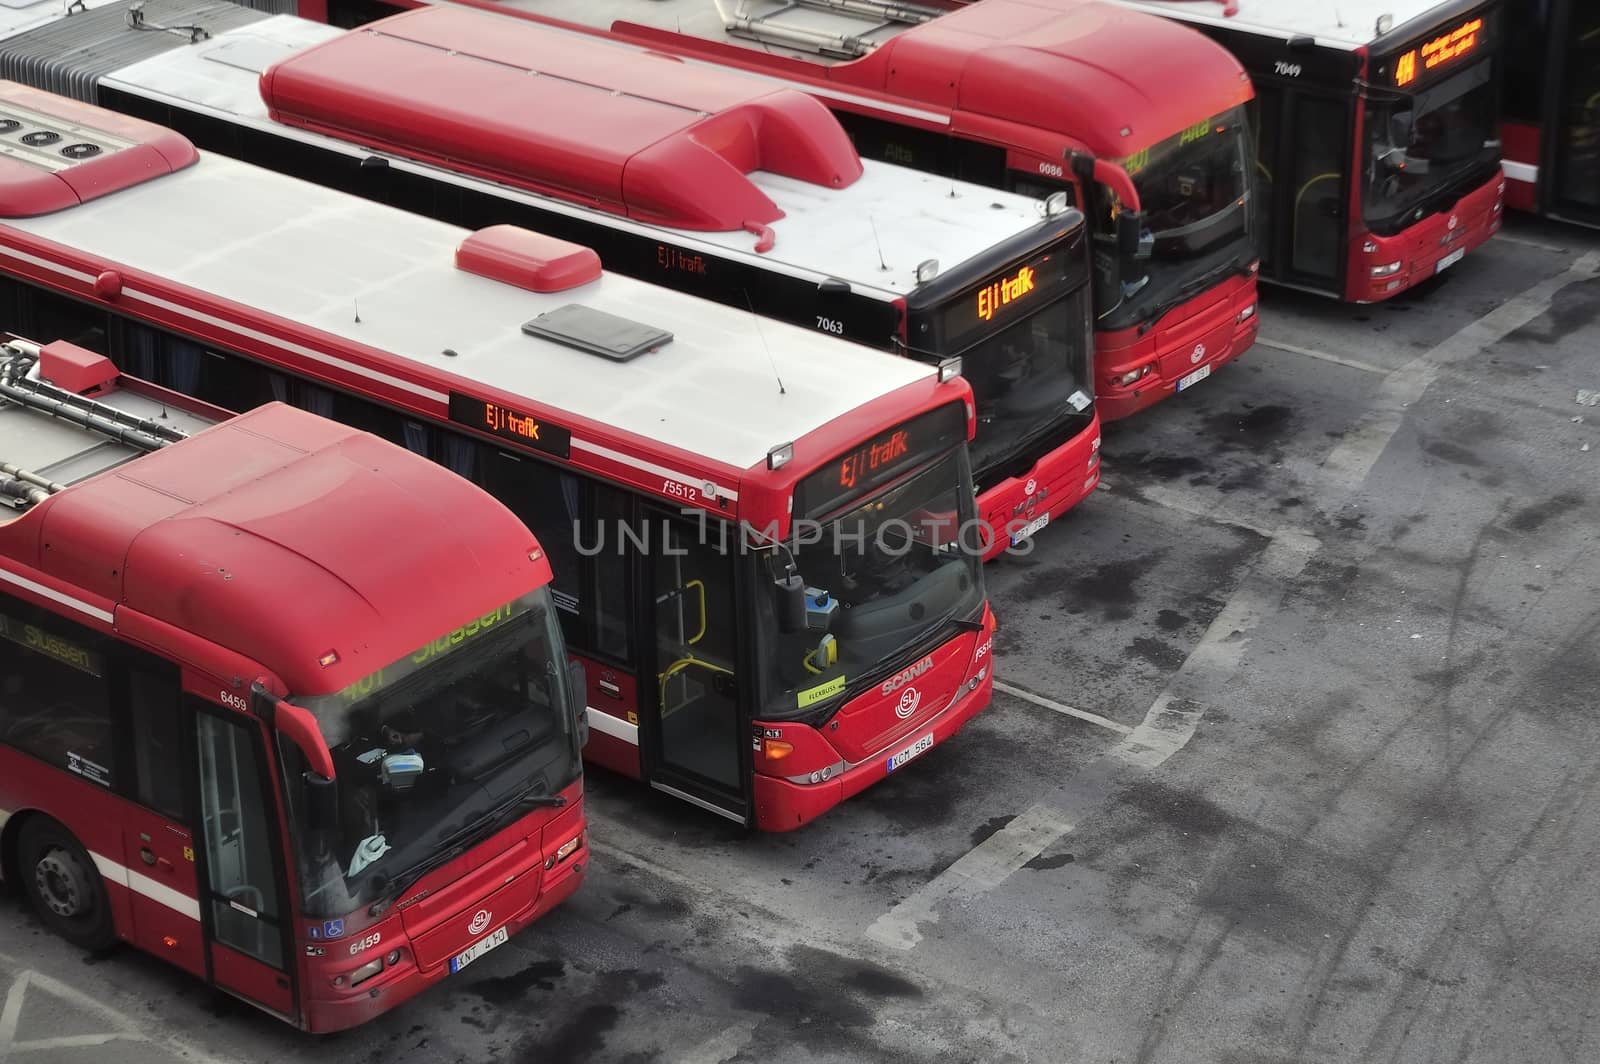 Parked buses in a row, from above